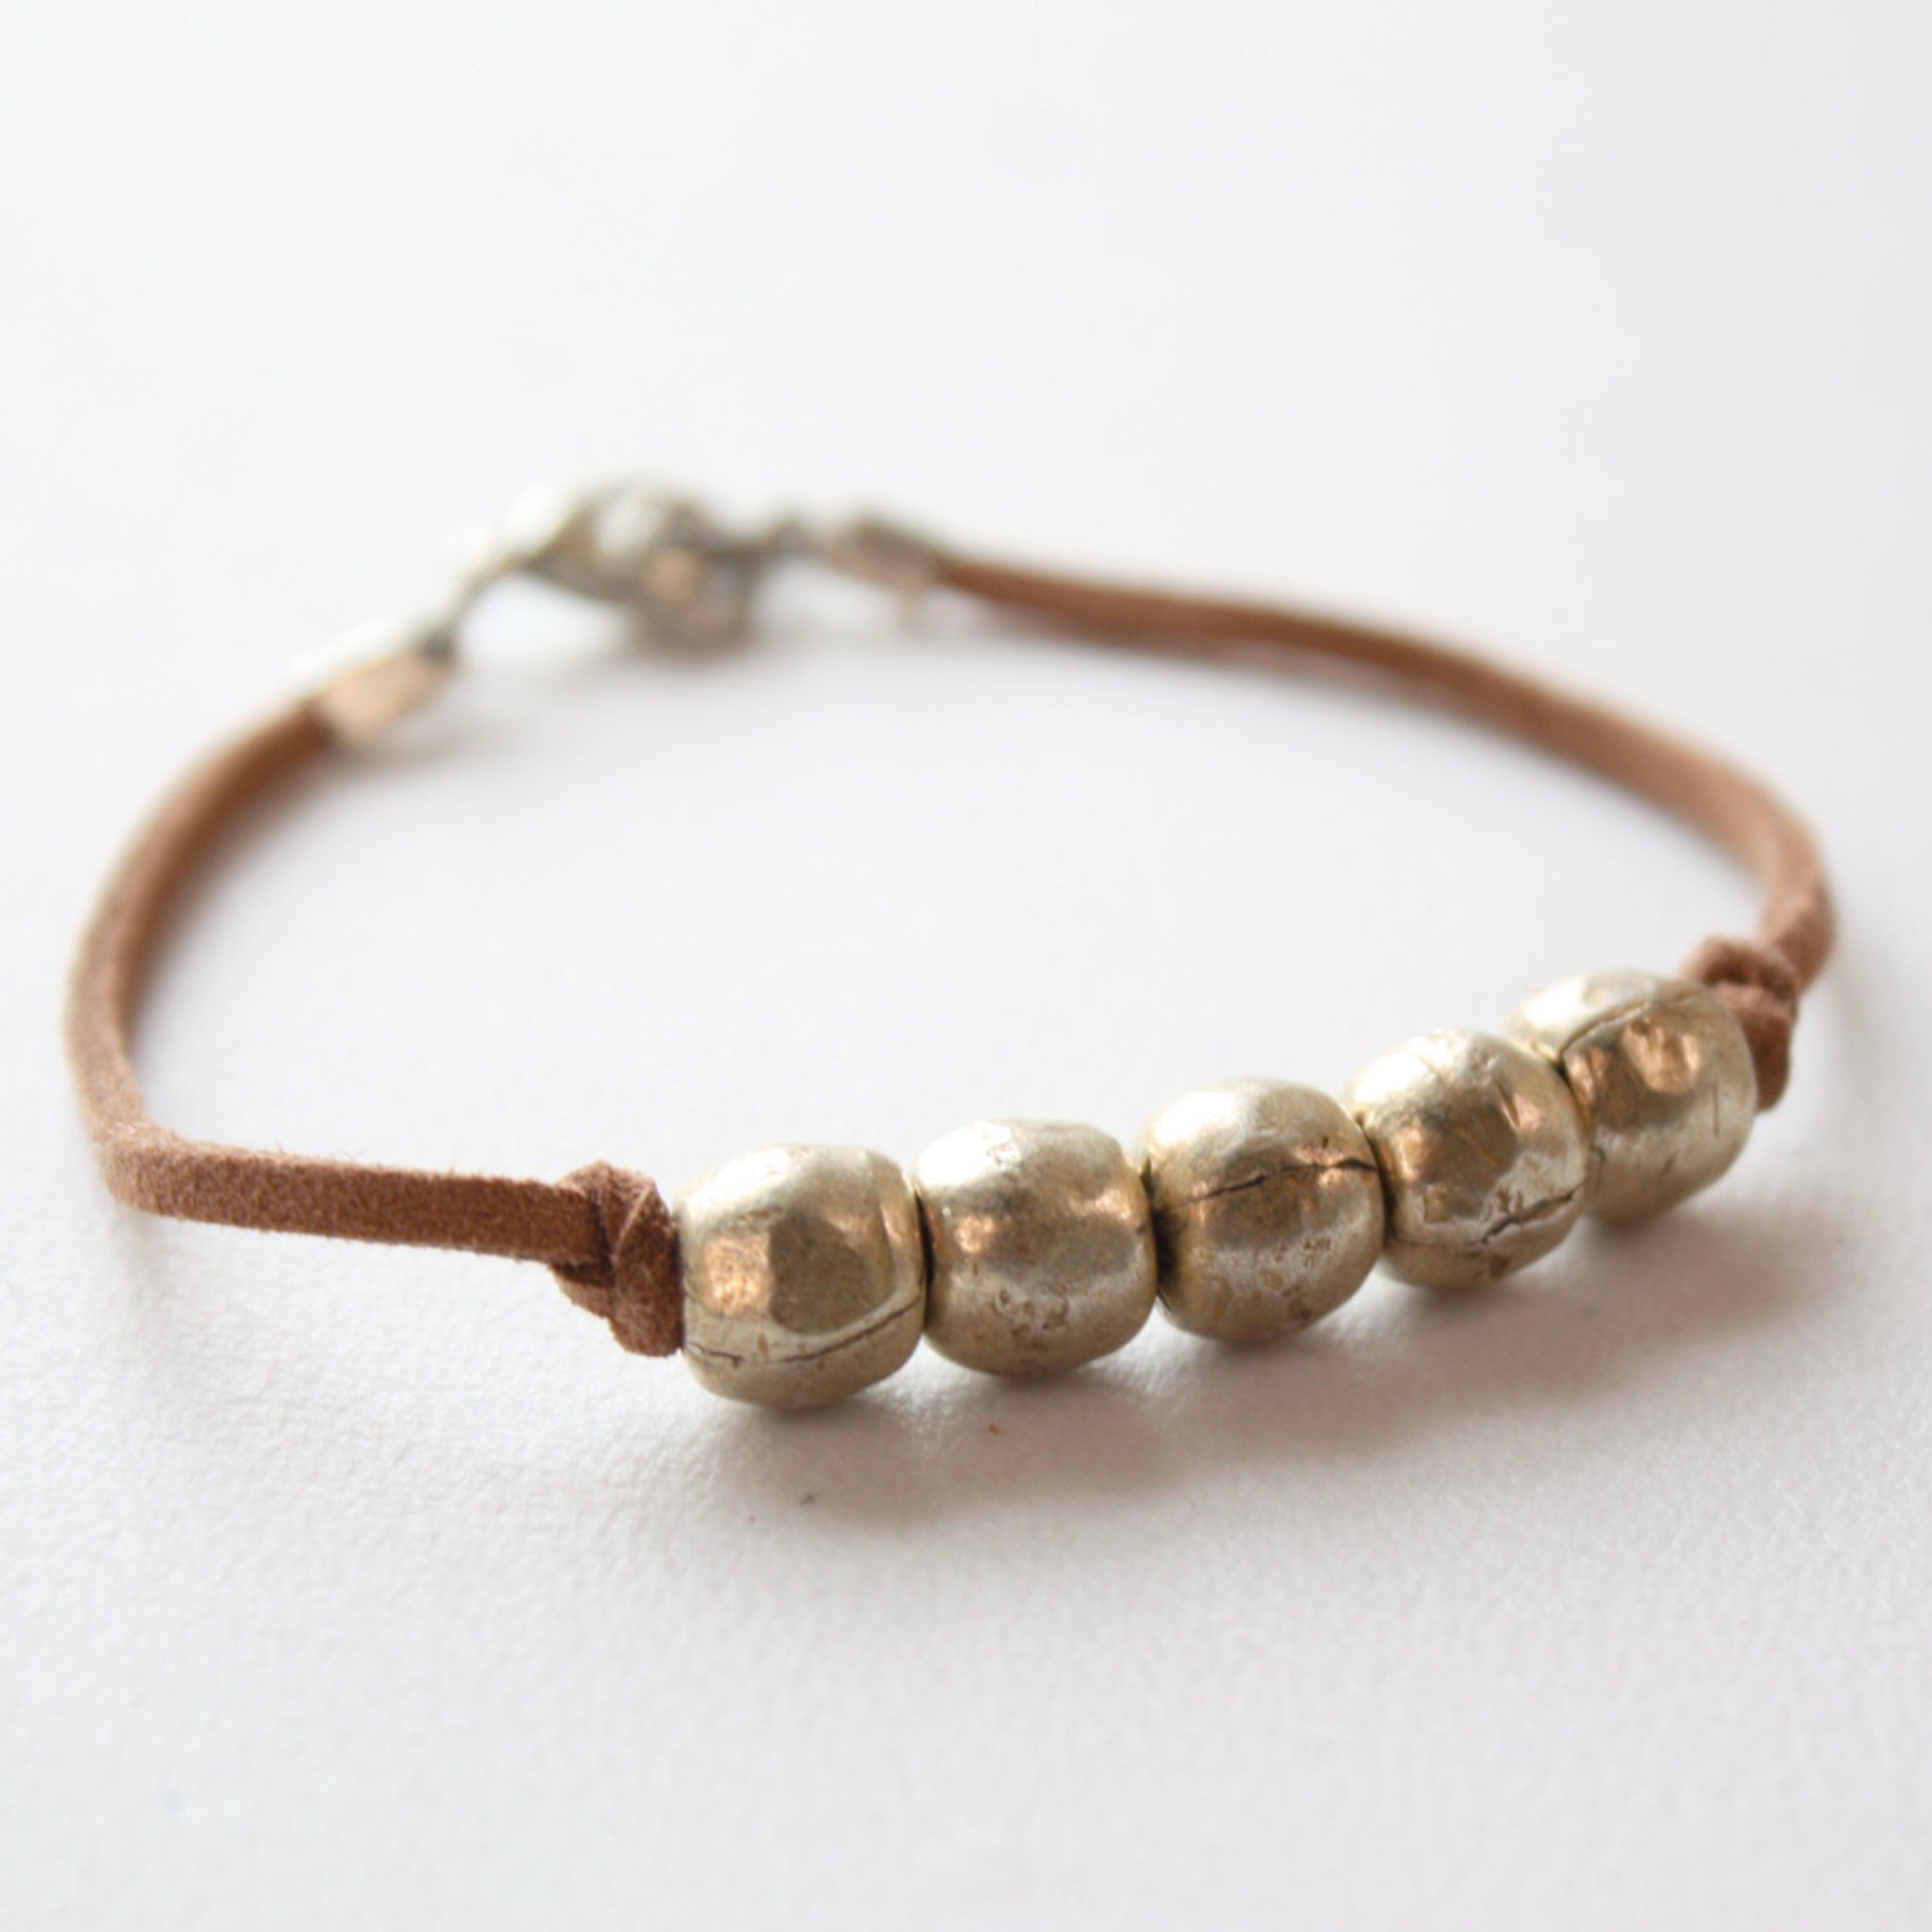 Gold Bead Boho Bracelet with Vegan Suede - Made in the USA